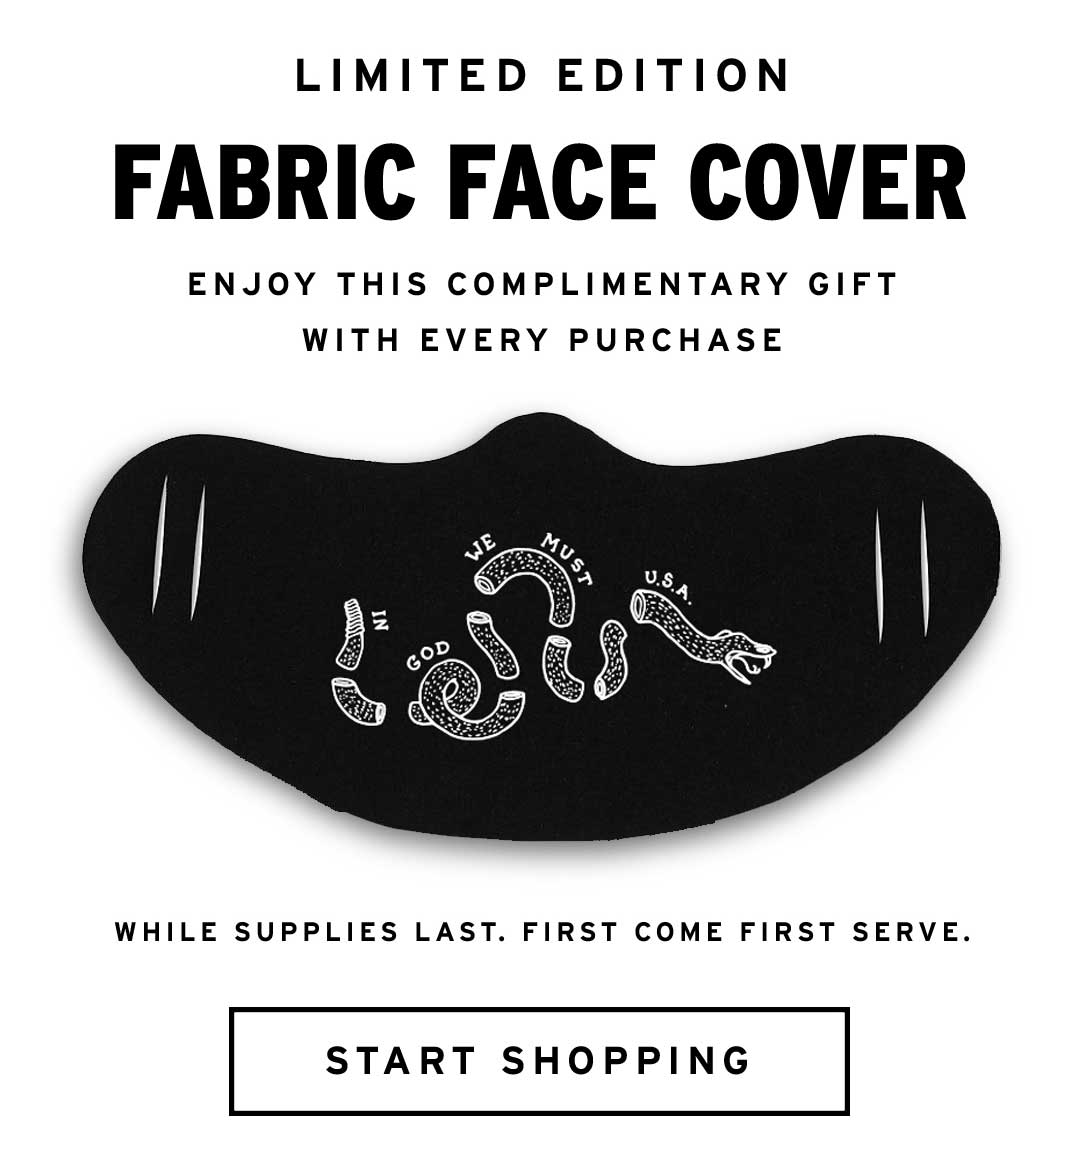 LImited Edition Fabric Face Cover. Enjoy this Complimentary Gift with Every Purchase.